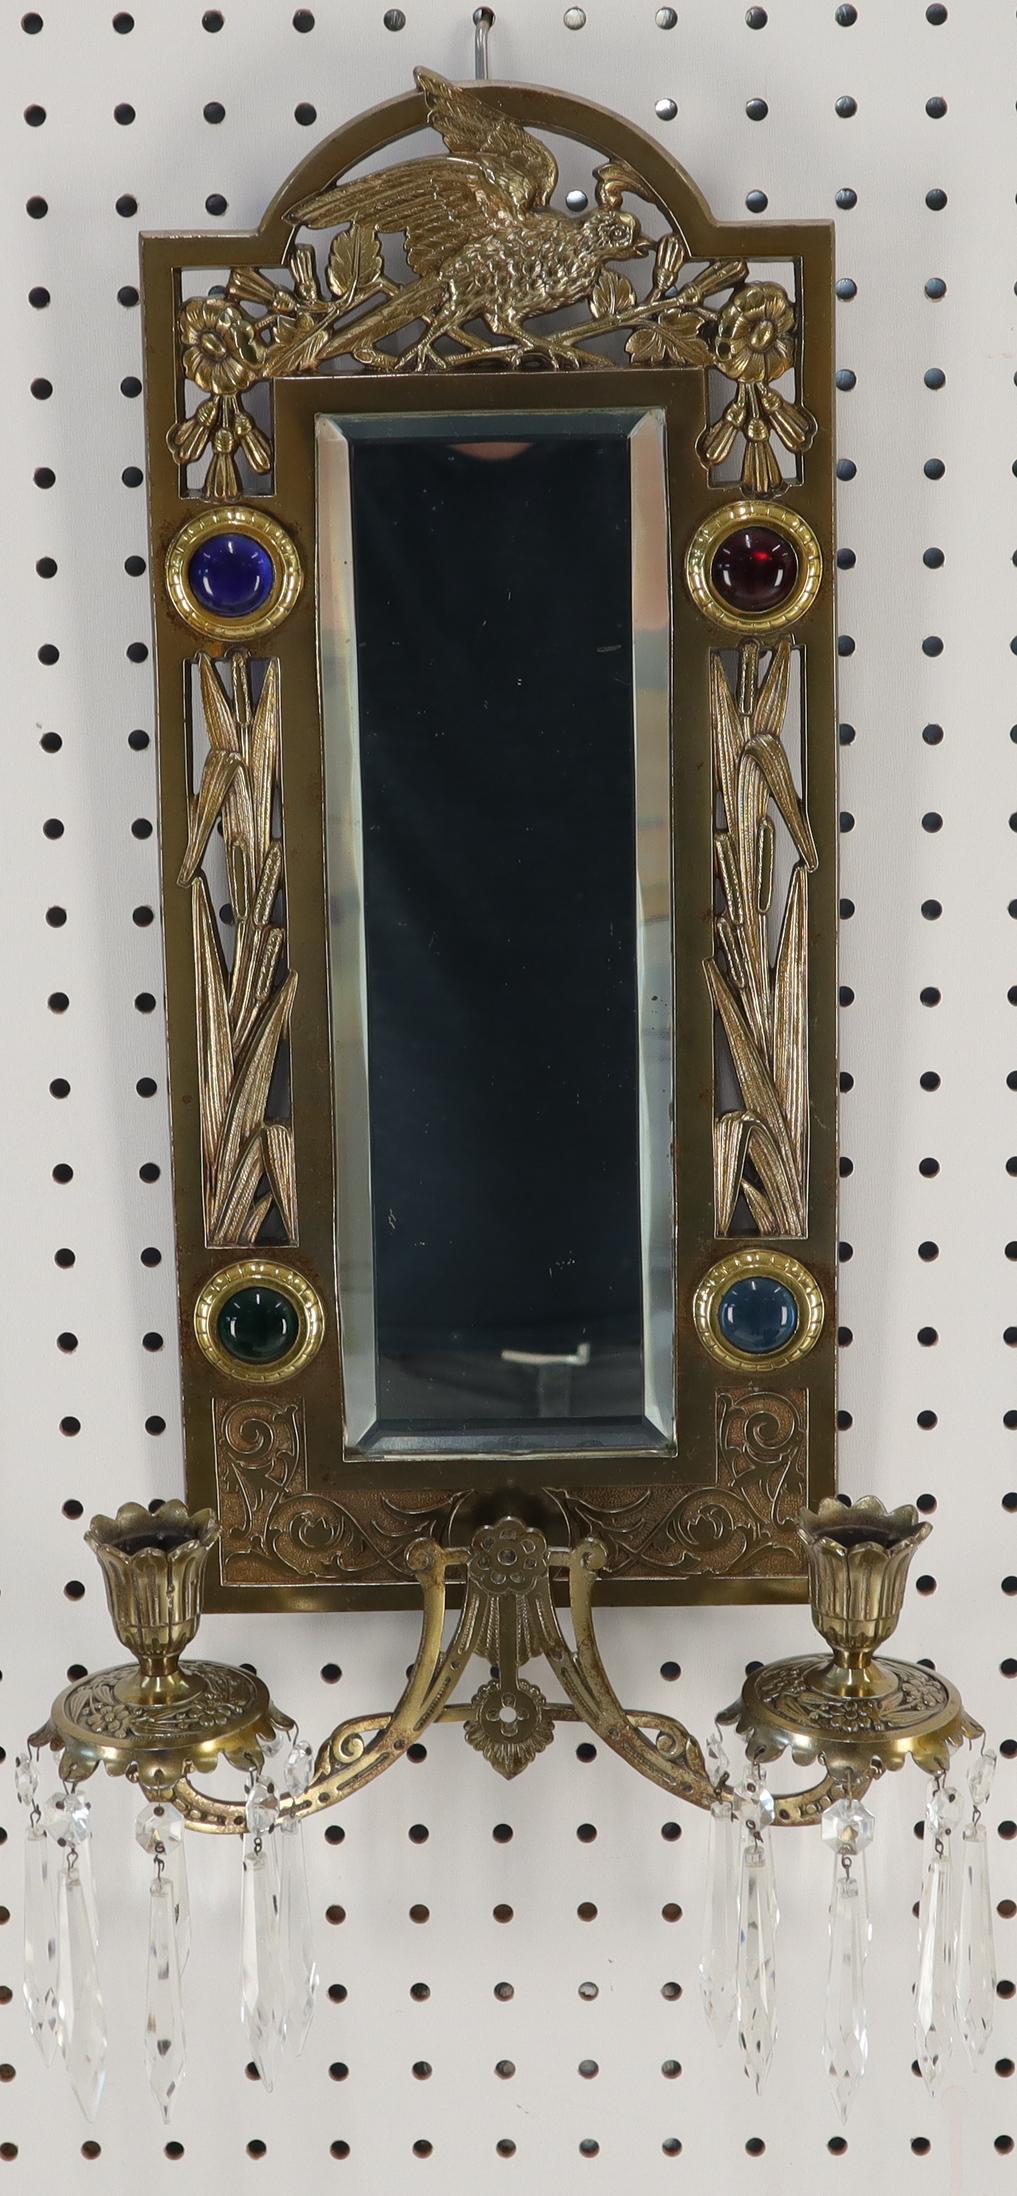 Antique brass sconce mirror with candle holders decorated with jewels.